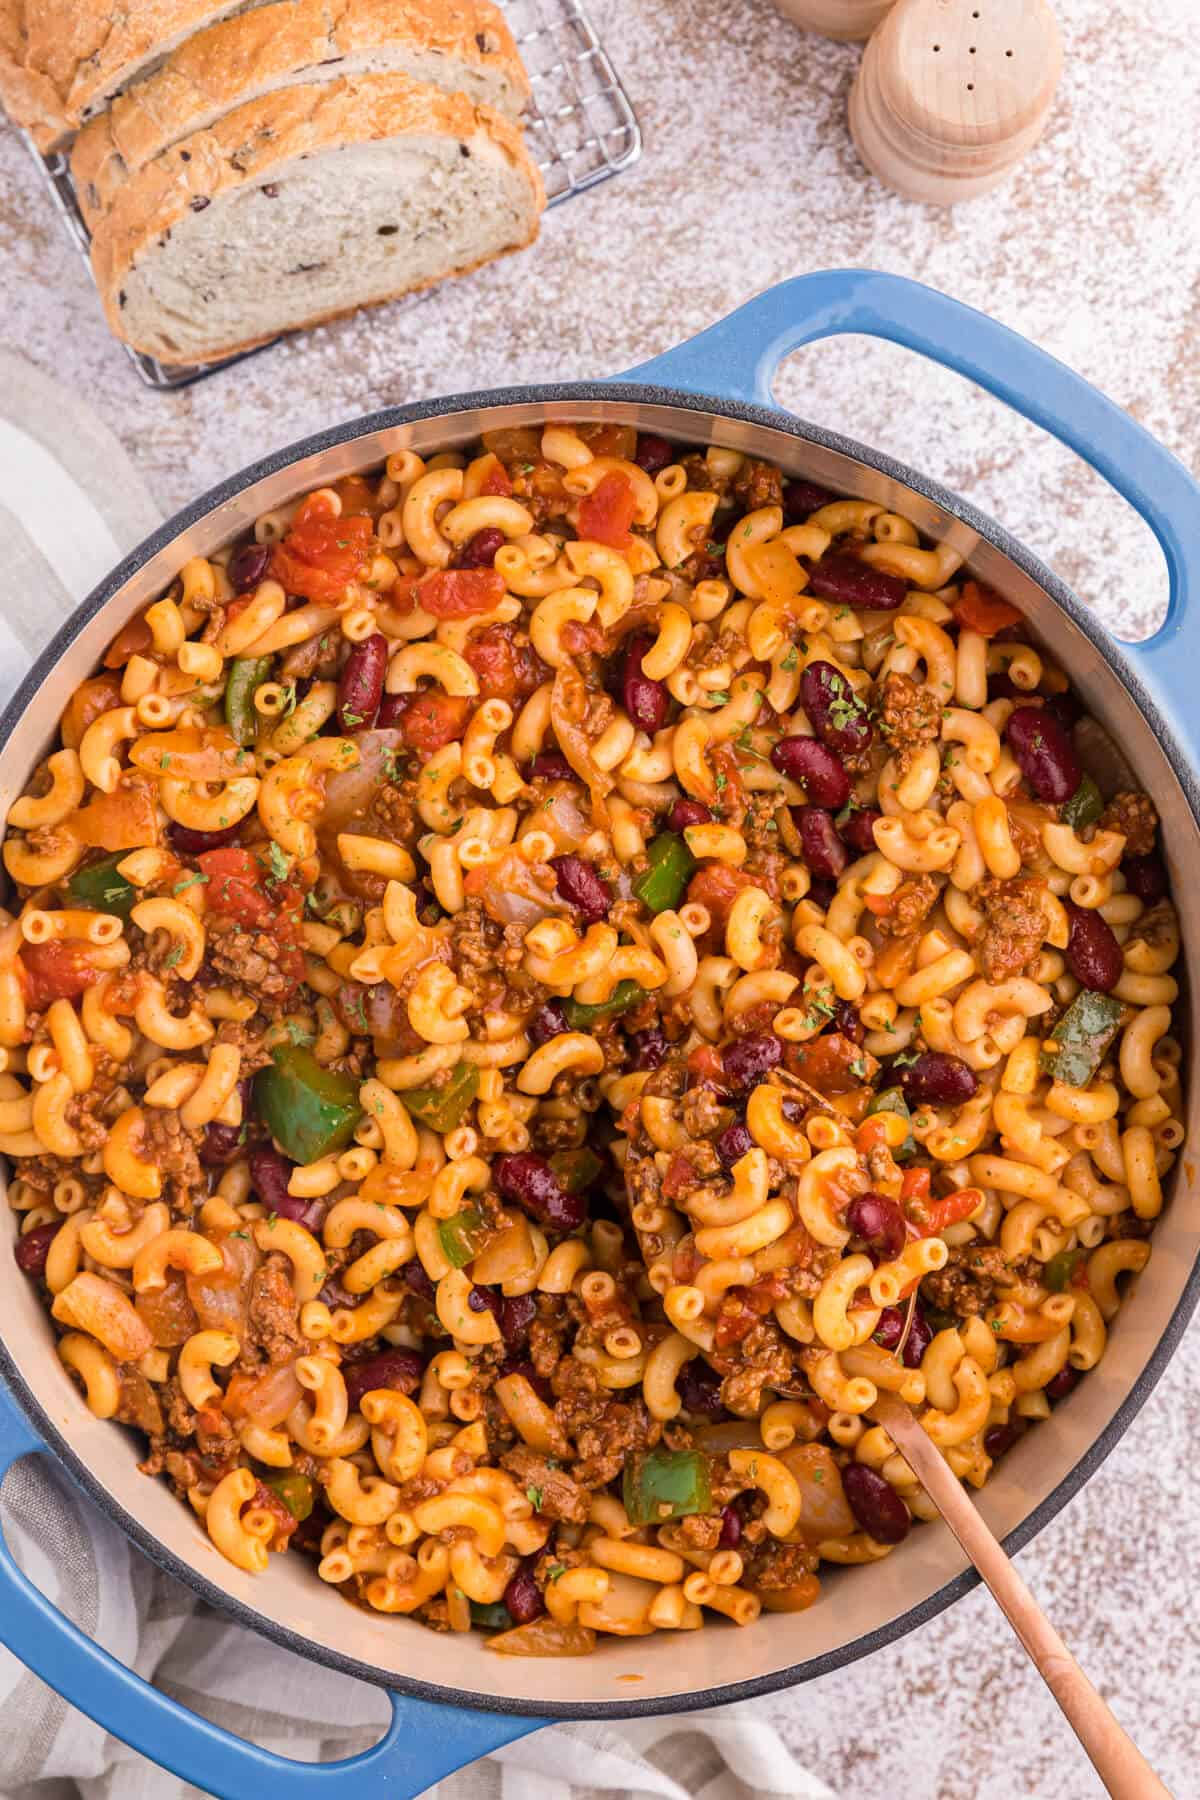 Chili macaroni in a pot with a serving spoon.